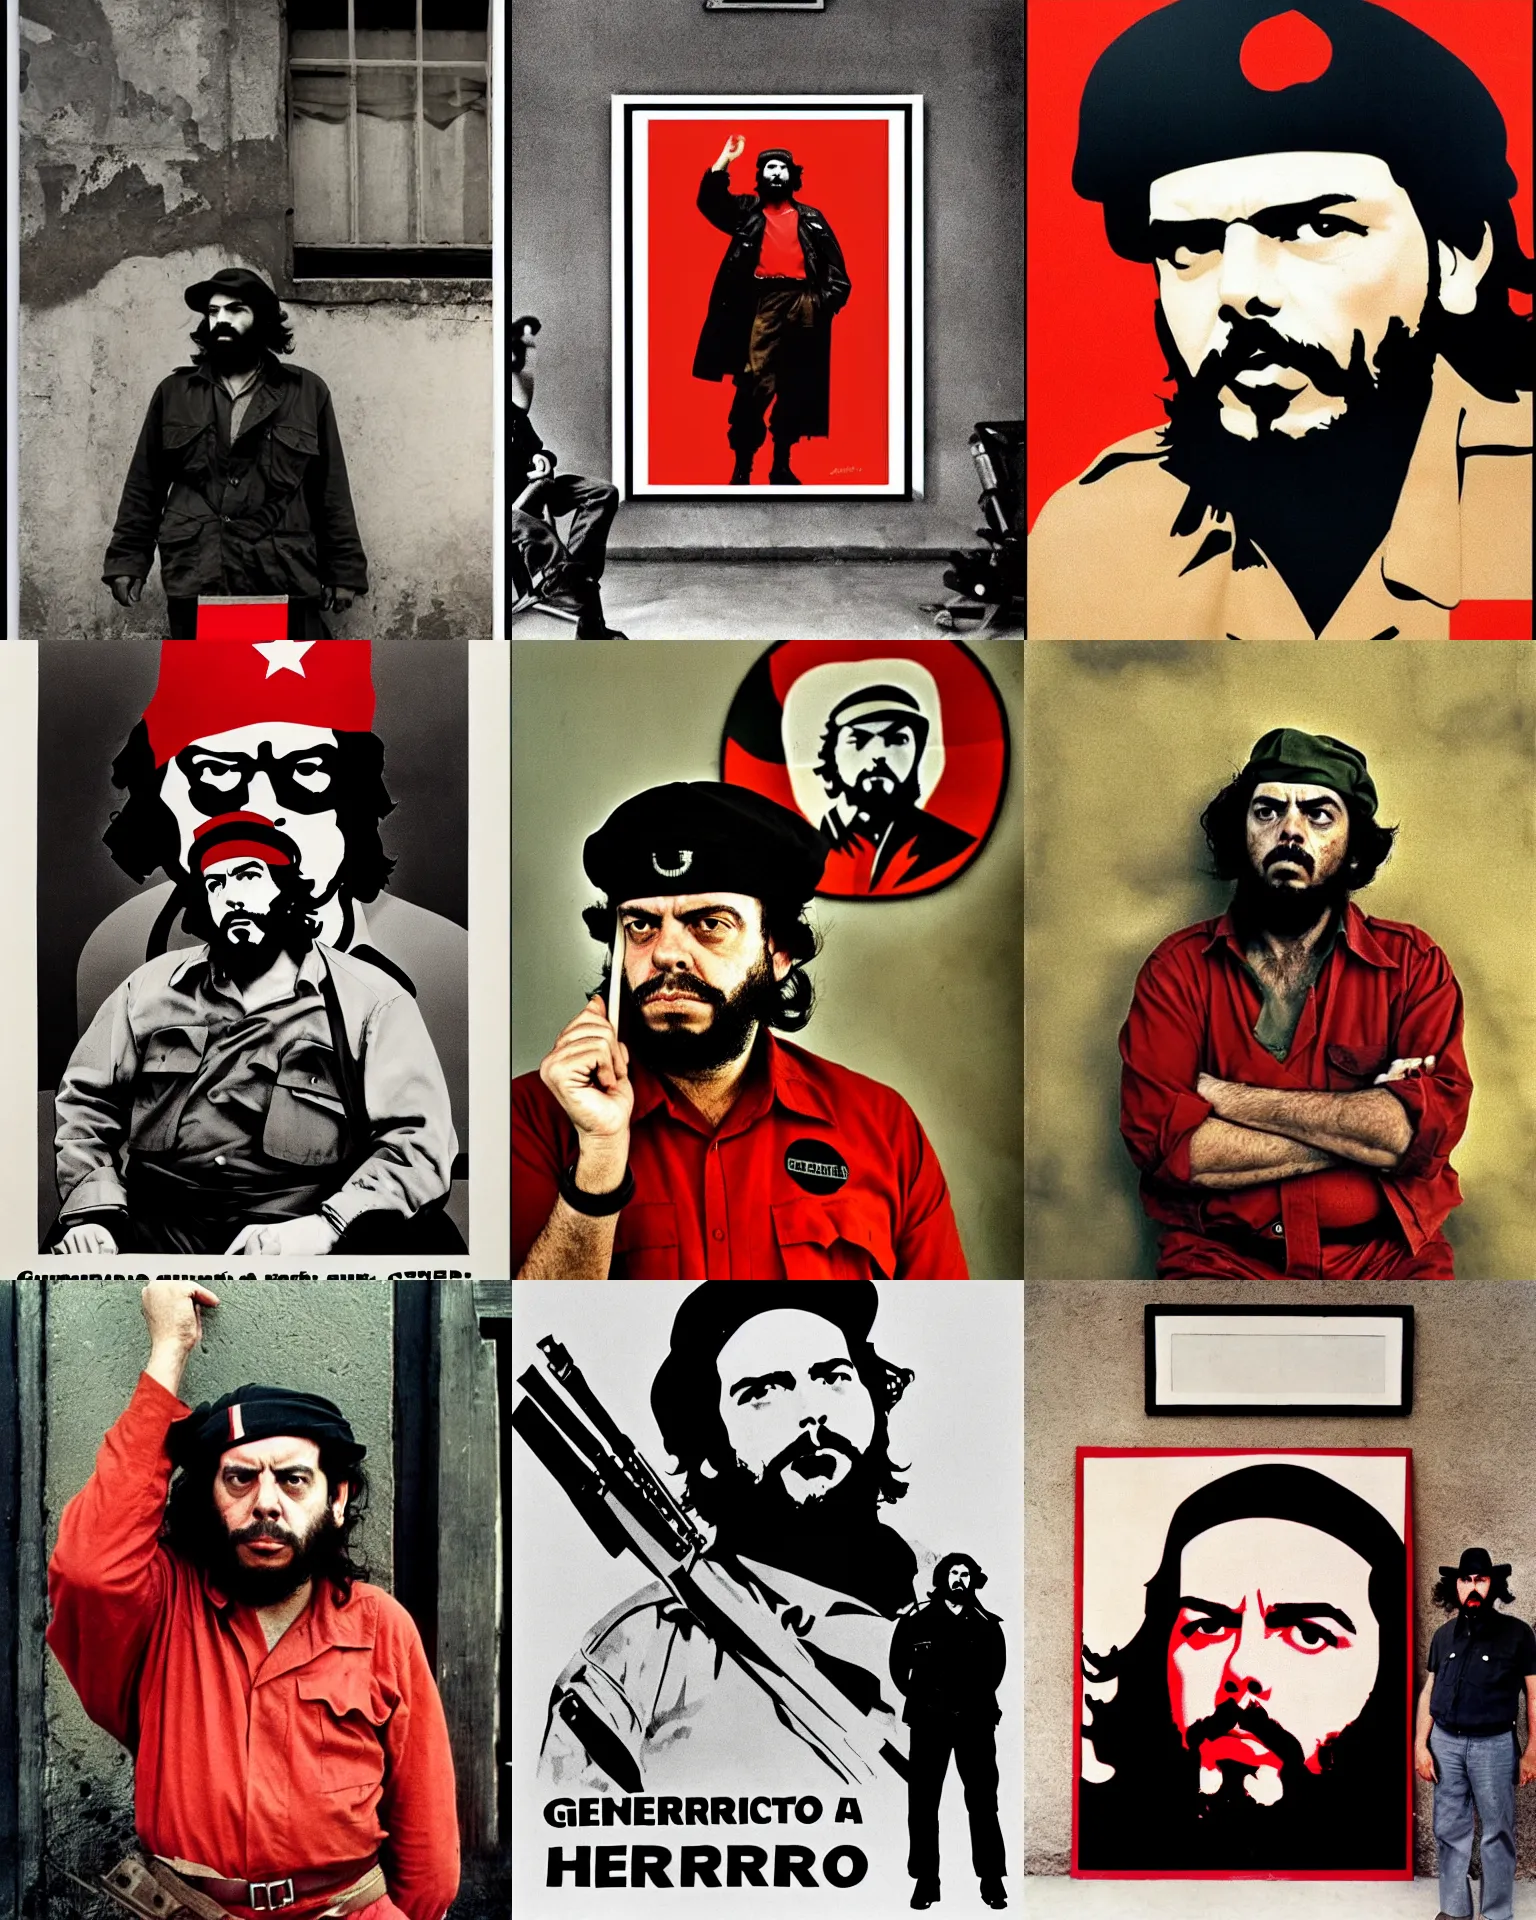 Prompt: guerrillero heroico, a red and black poster with a paul giamatti as che guevara, a character portrait by rene burri, behance, socialist realism, 1 9 7 0 s, colorized, associated press photo